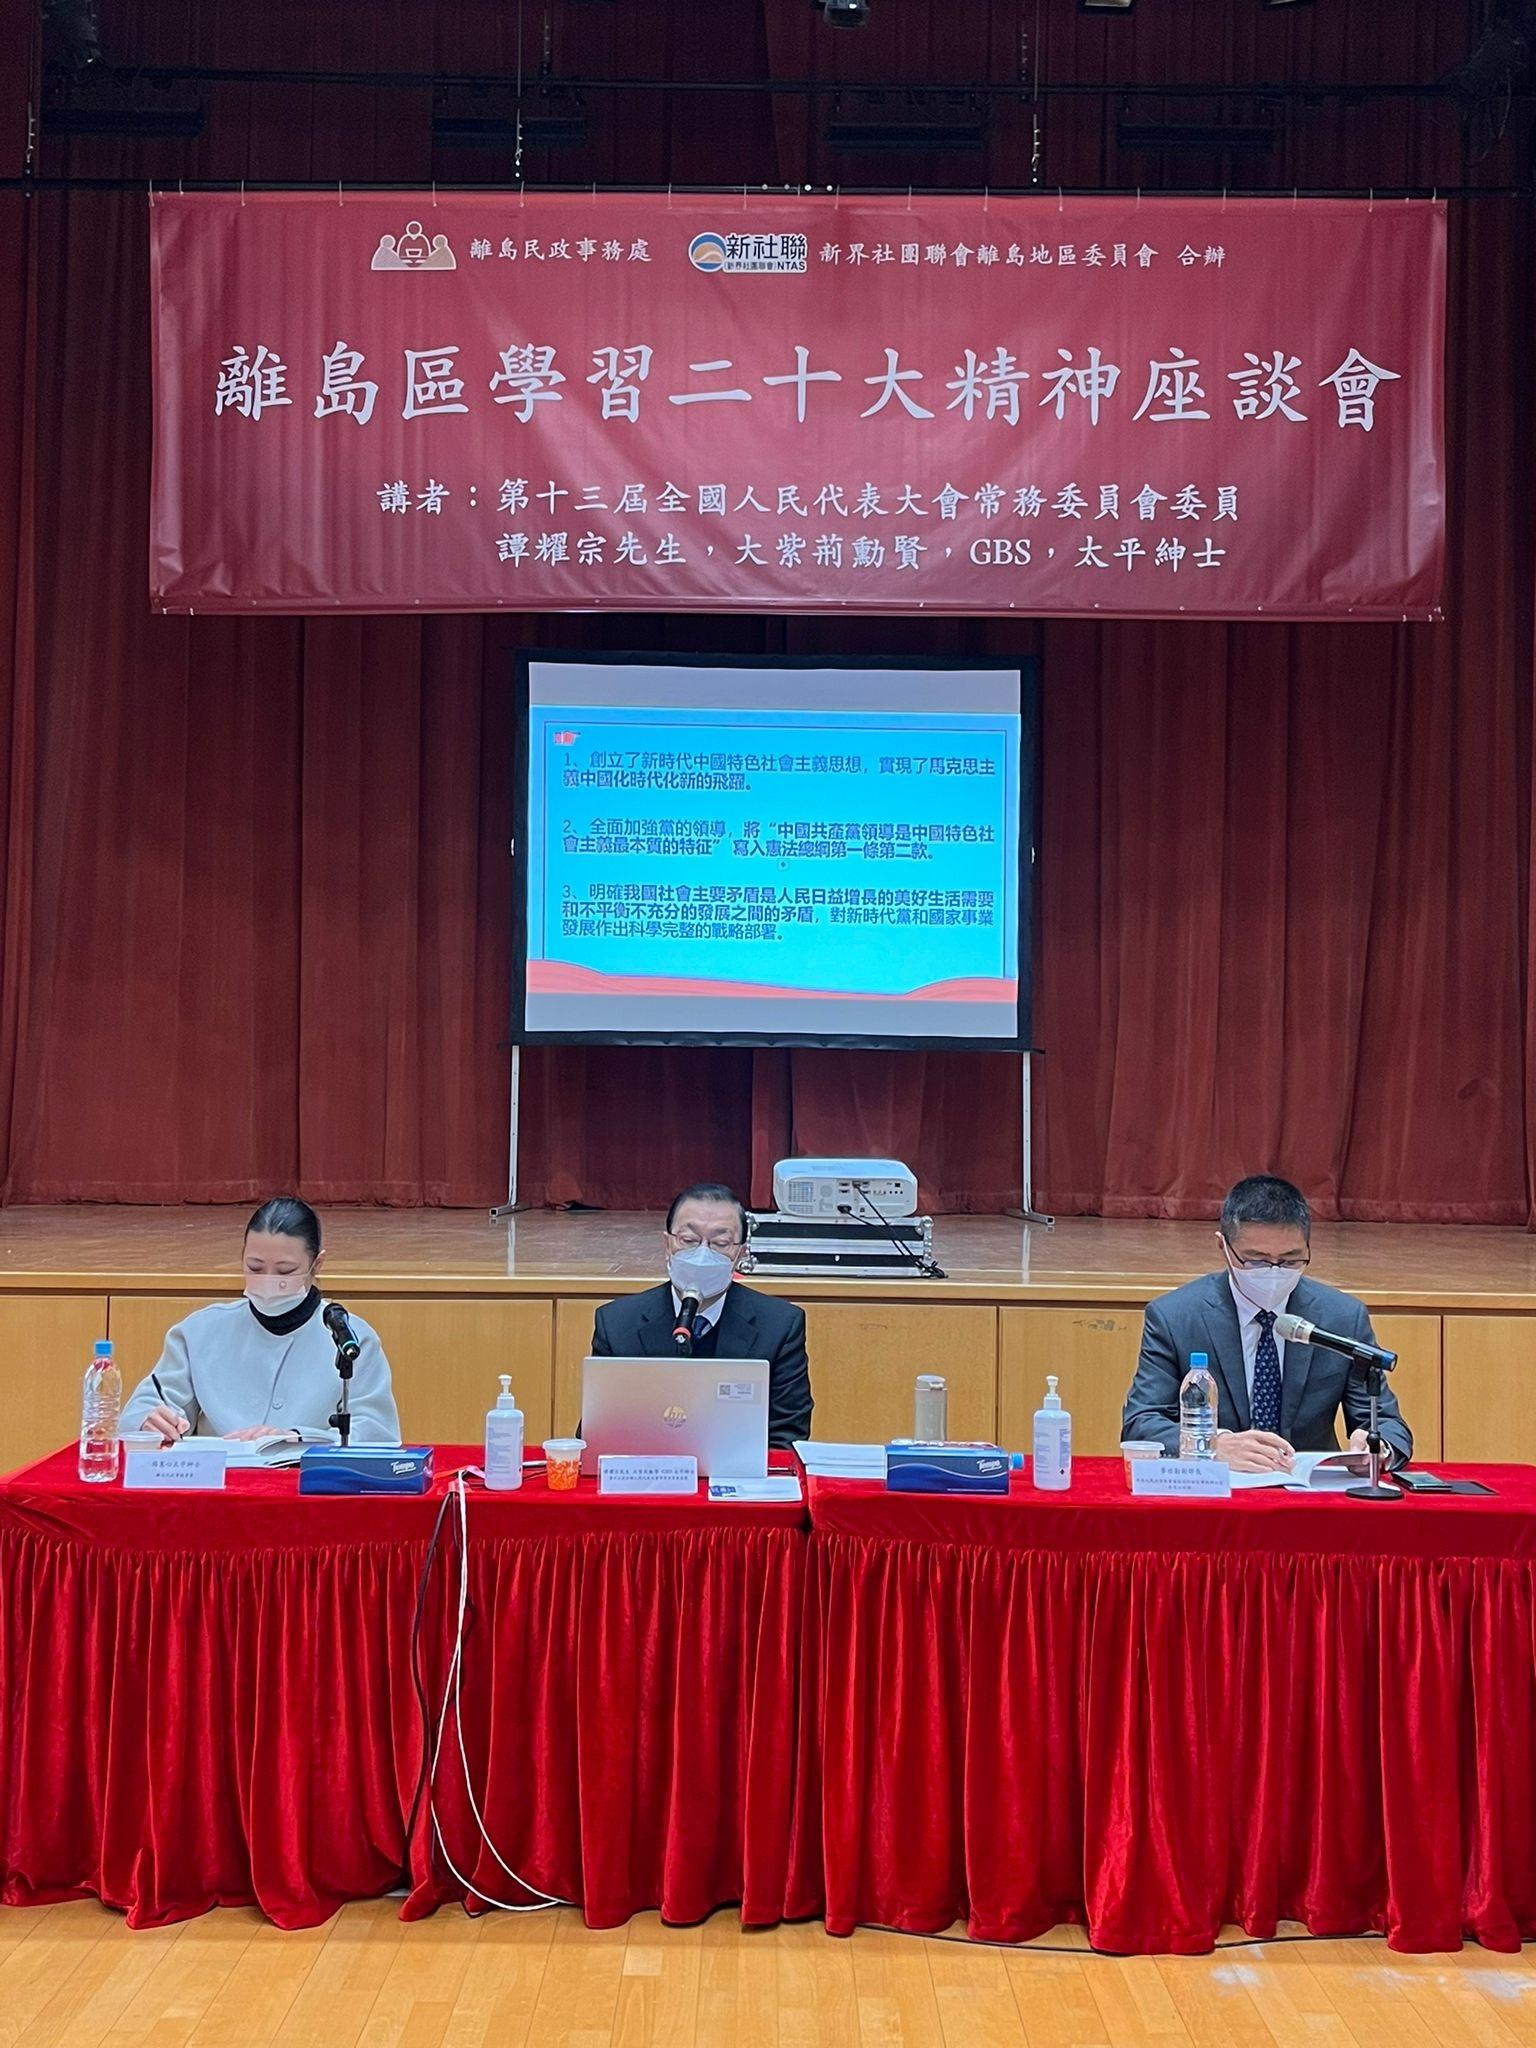 The Islands District Office, together with the New Territories Association of Societies Islands District Committee, today (December 13) held a session on "Spirit of the 20th National Congress of the CPC" at Tung Chung Community Hall. Photo shows member of the Standing Committee of the National People's Congress Mr Tam Yiu-chung (centre), the Deputy Director General of the New Territories Sub-office of the Liaison Office of the Central People's Government in the Hong Kong Special Administrative Region, Mr Li Gongxun (right), and the District Officer (Islands), Miss Amy Yeung (left). 